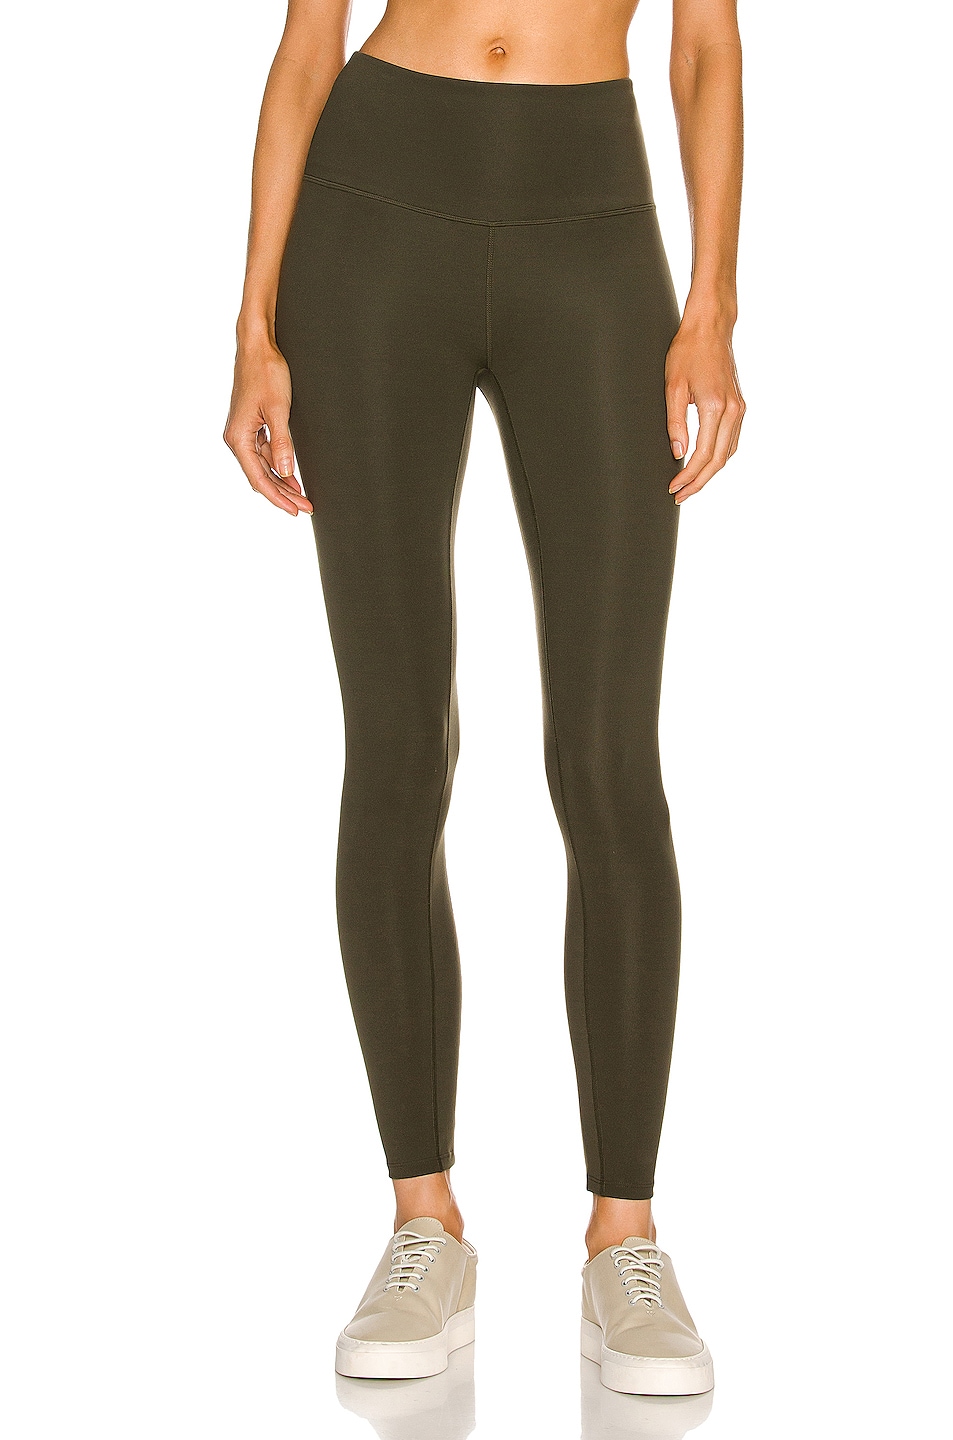 Image 1 of Varley Let's Move high 27" Legging in Forest Night